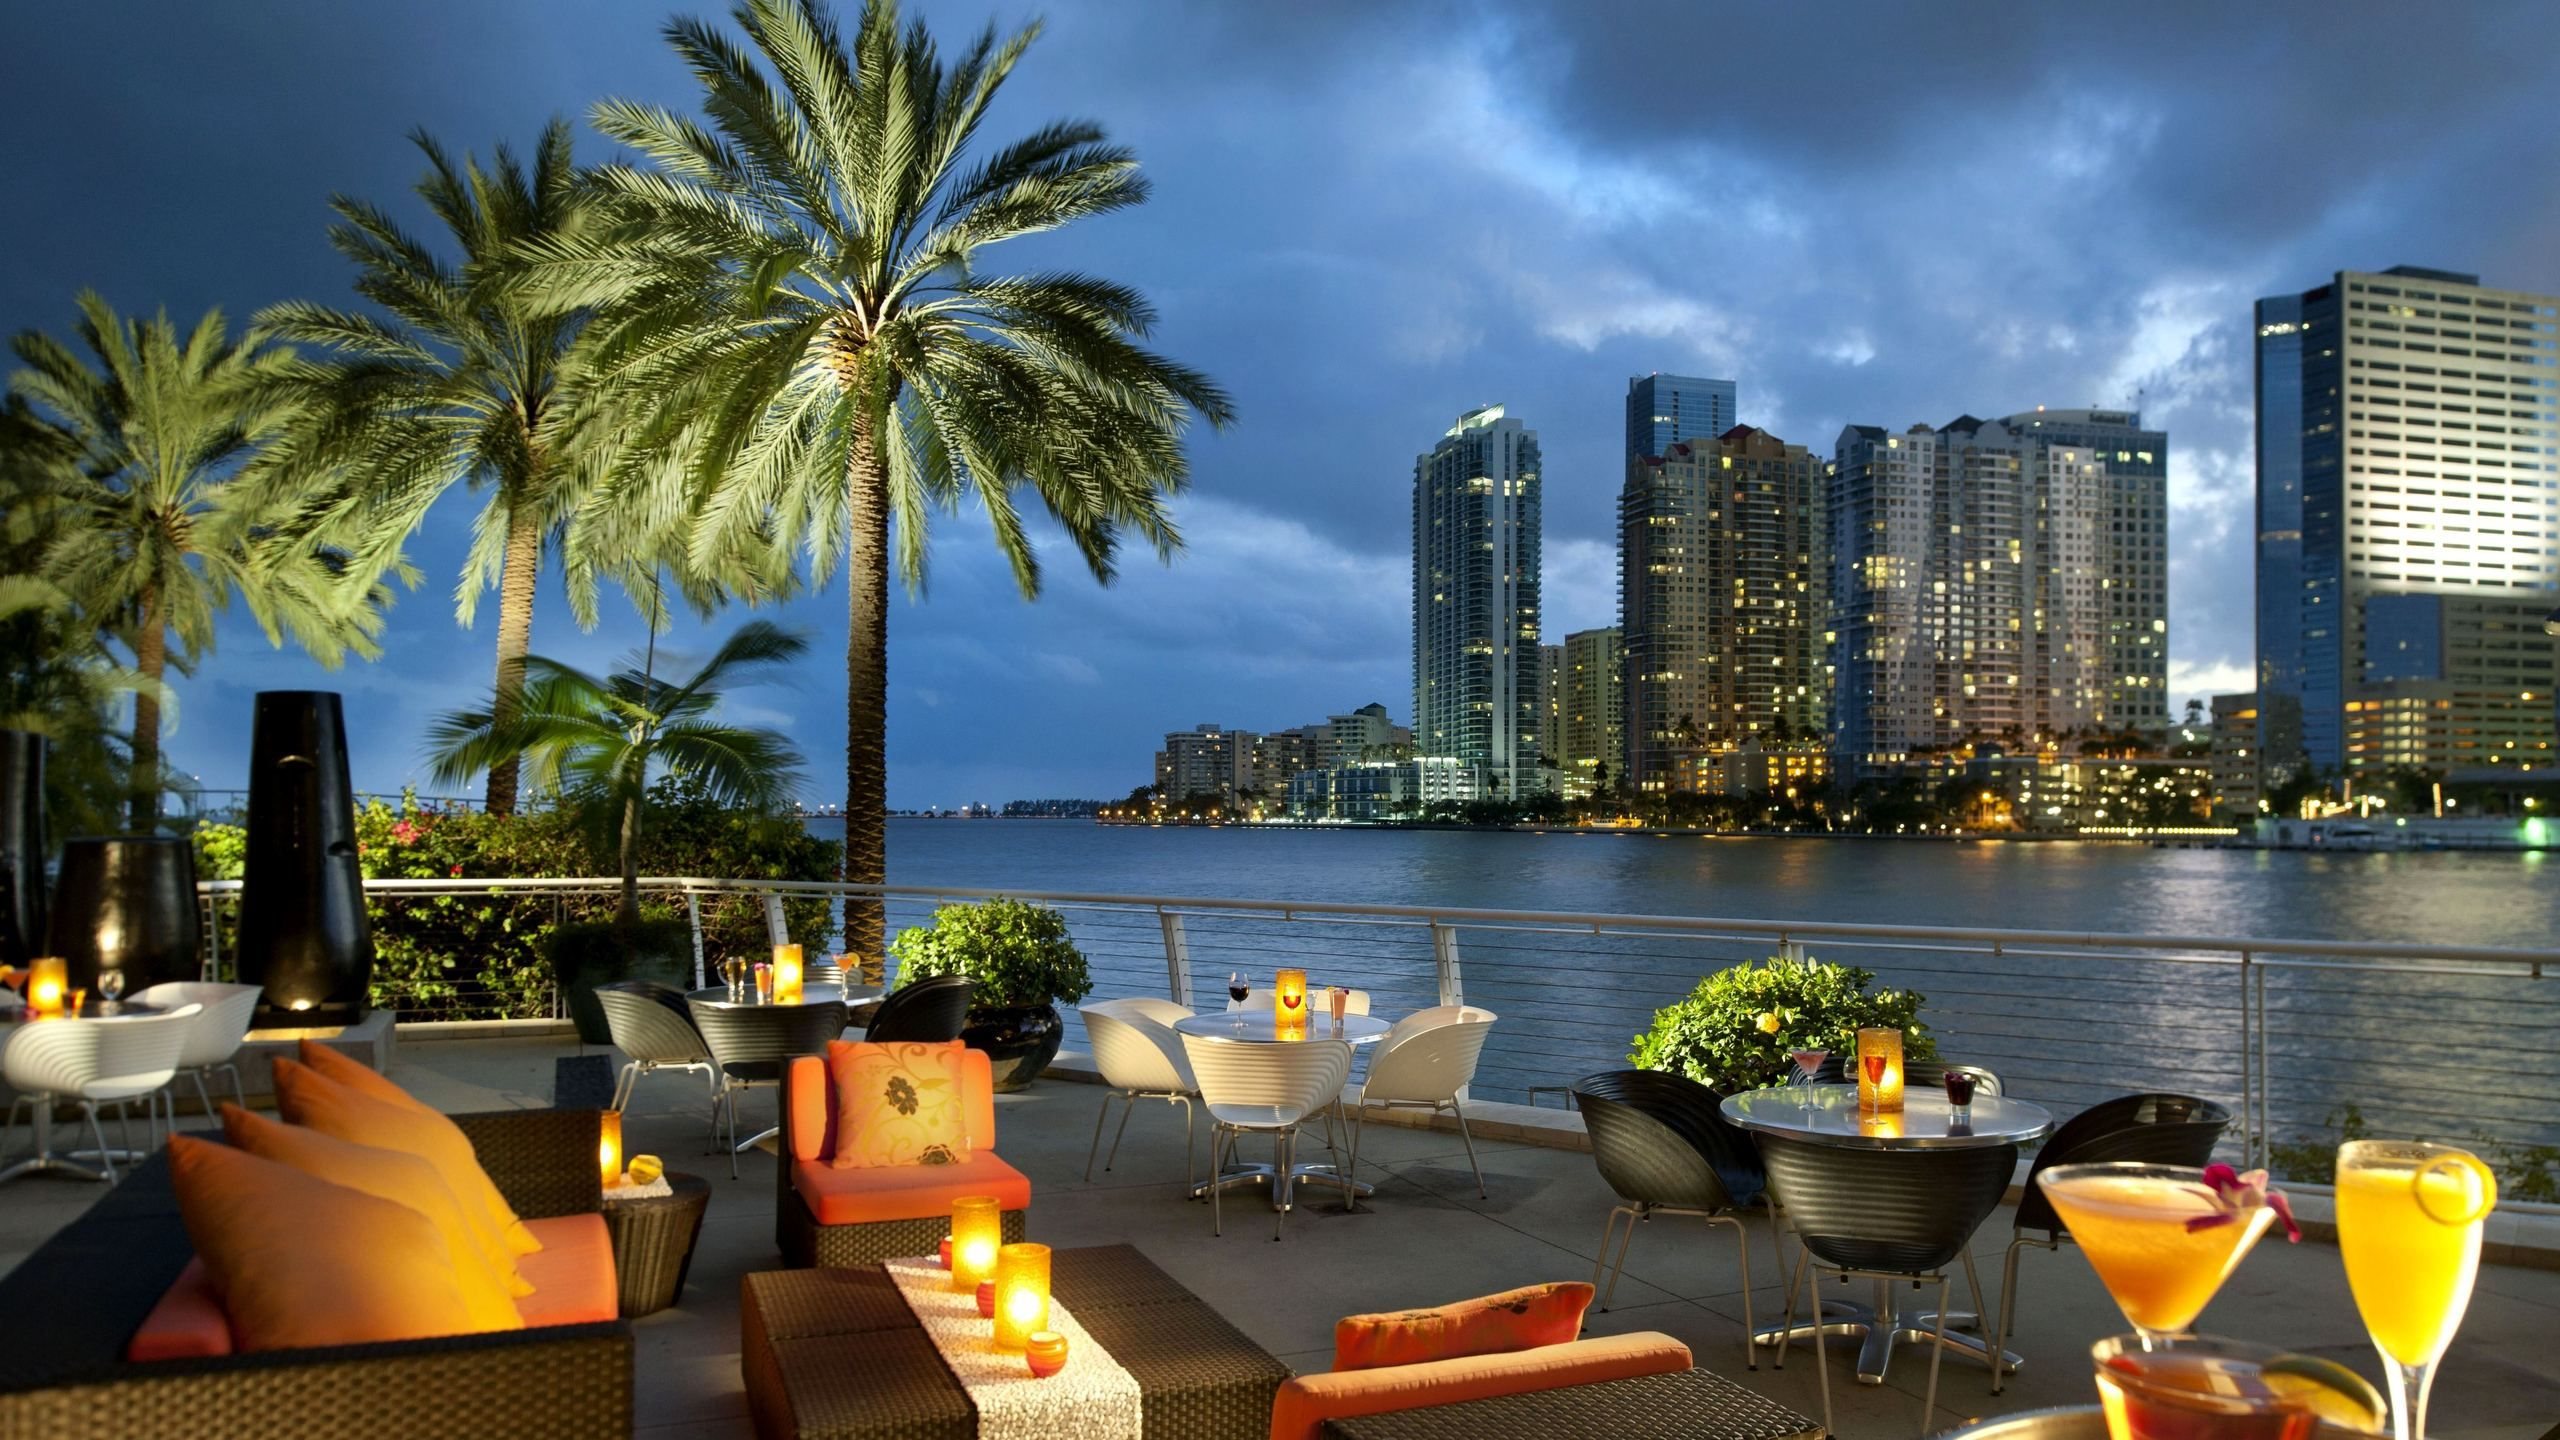 Evening Out in Miami widescreen wallpaper | Wide-Wallpapers.NET